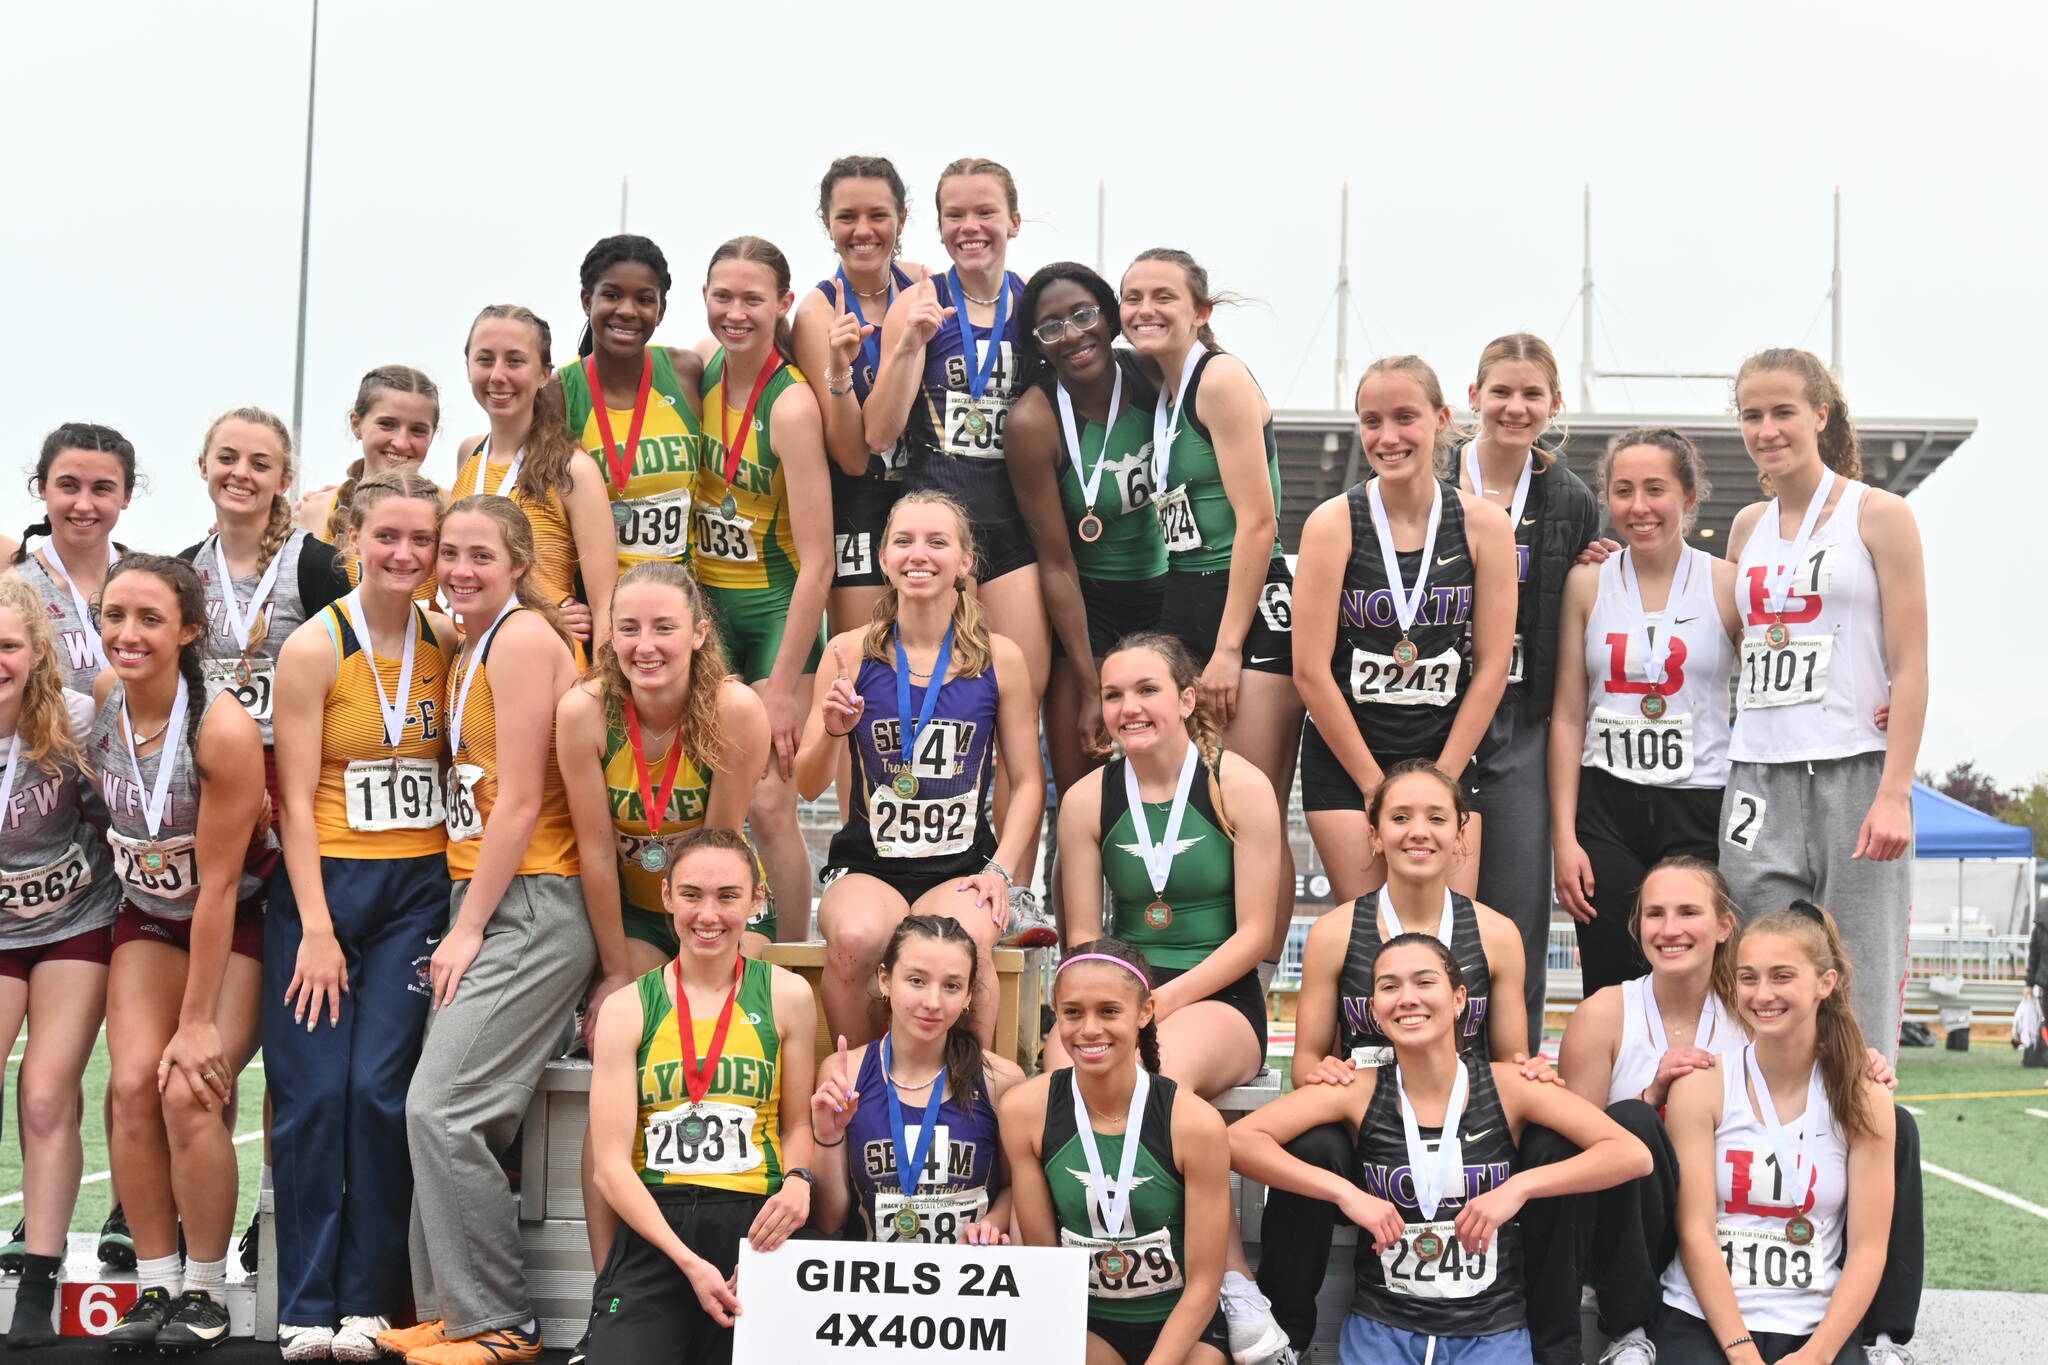 Sequim’s 4x400 relay team of Kaitlyn Bloomenrader, Riley Pyeatt, Eve Mavy and Hi’ilei Robinson celebrate a first place finish at the state 2A meet in Tacoma on May 28. Sequim Gazette file photo by Michael Dashiell